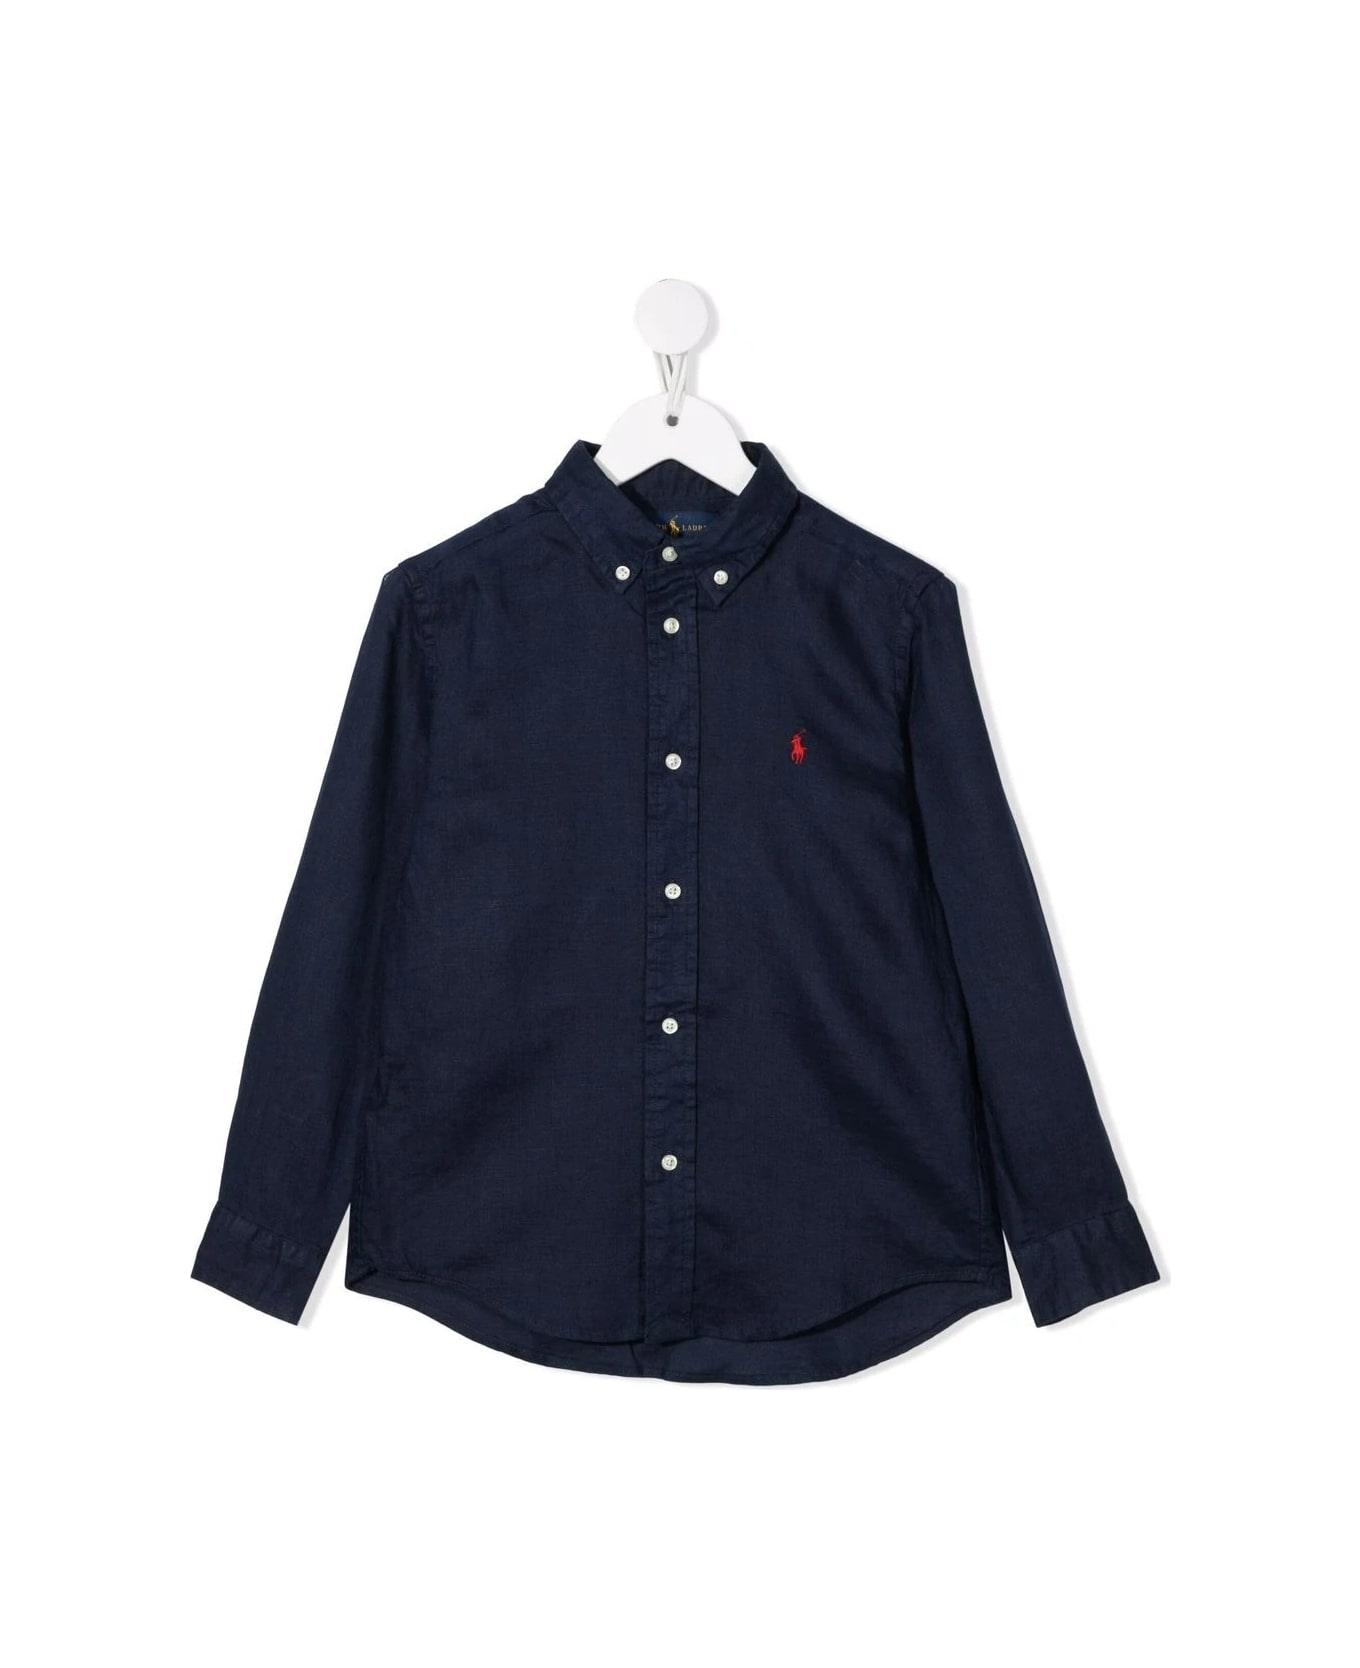 Polo Ralph Lauren Navy Blue Linen Shirt With Embroidered Pony